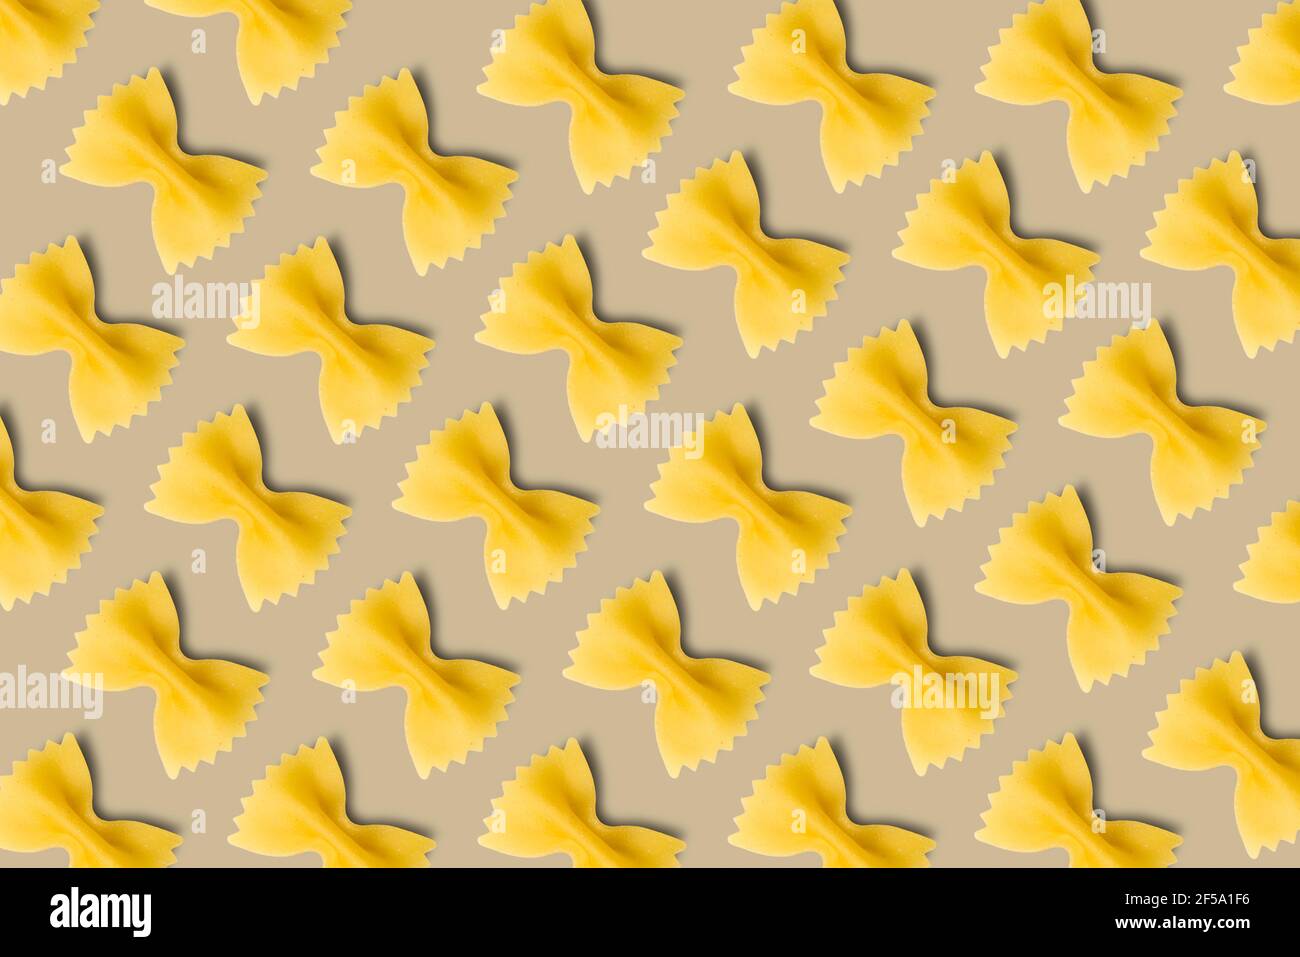 Italian pasta pattern on a light brown background. Top view. Stock Photo